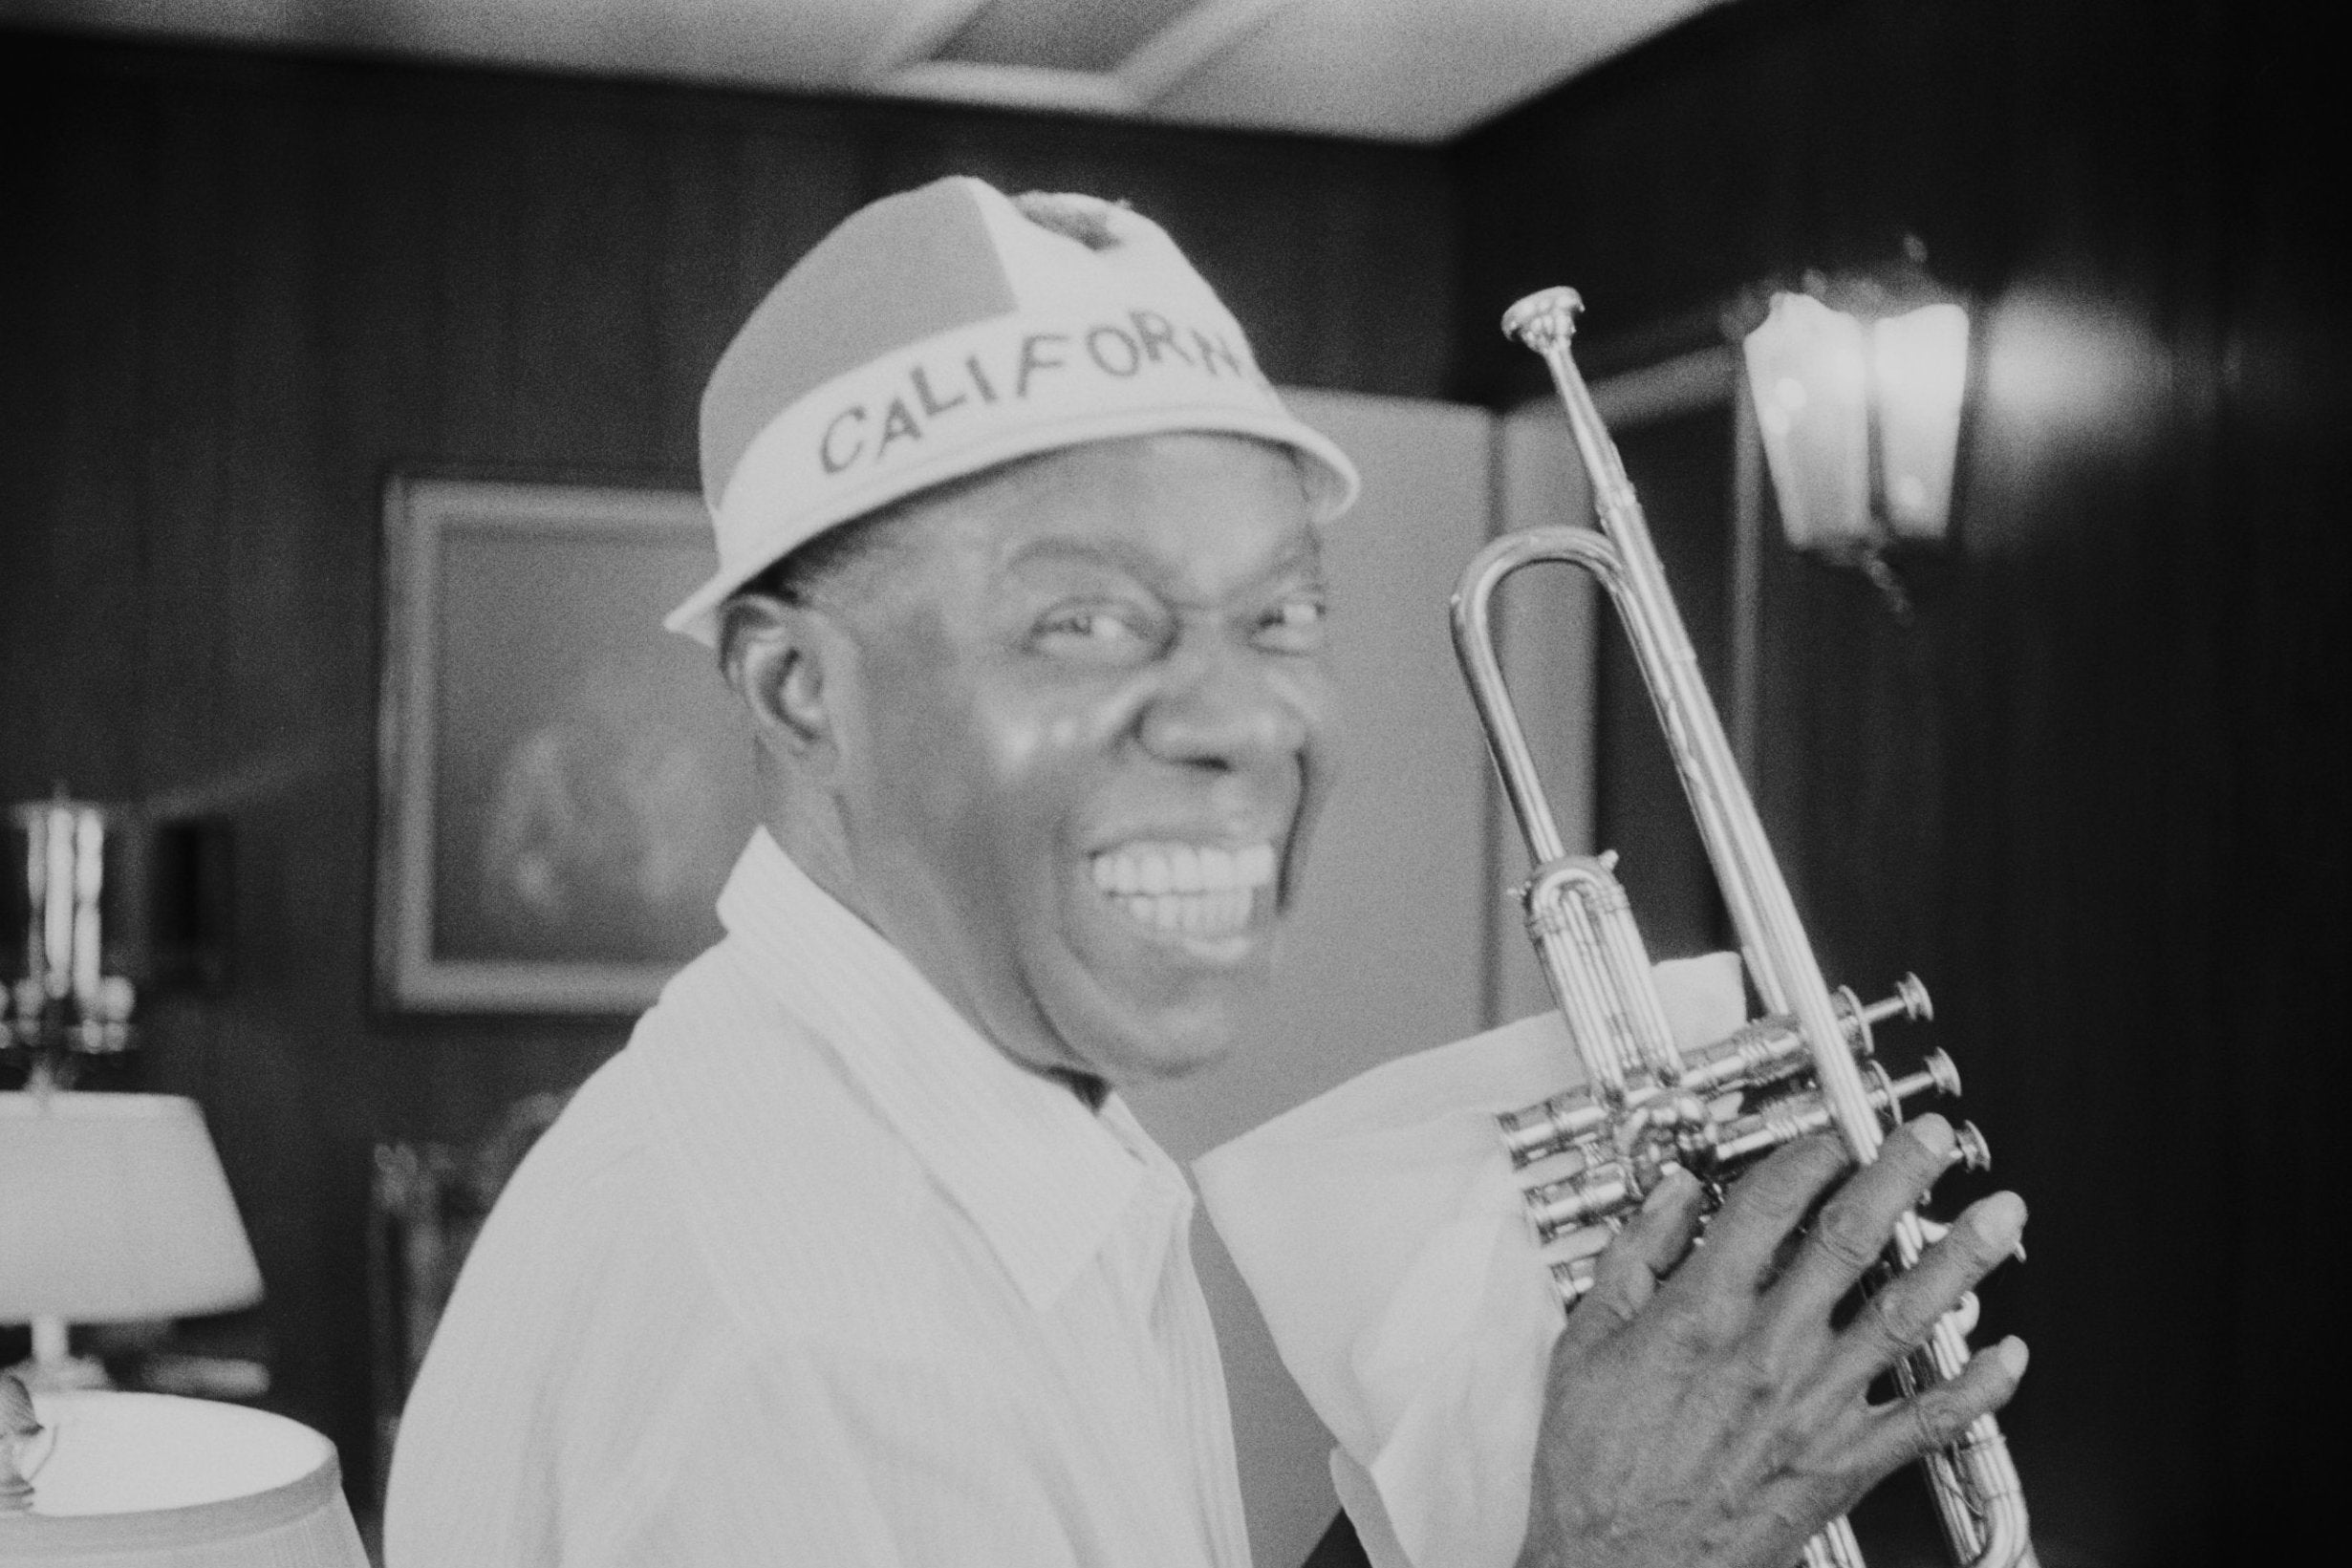 Armstrong shortly before his death in 1971. He was one of the first musical stars of the radio era and later was regularly included on lists of the most admired Americans